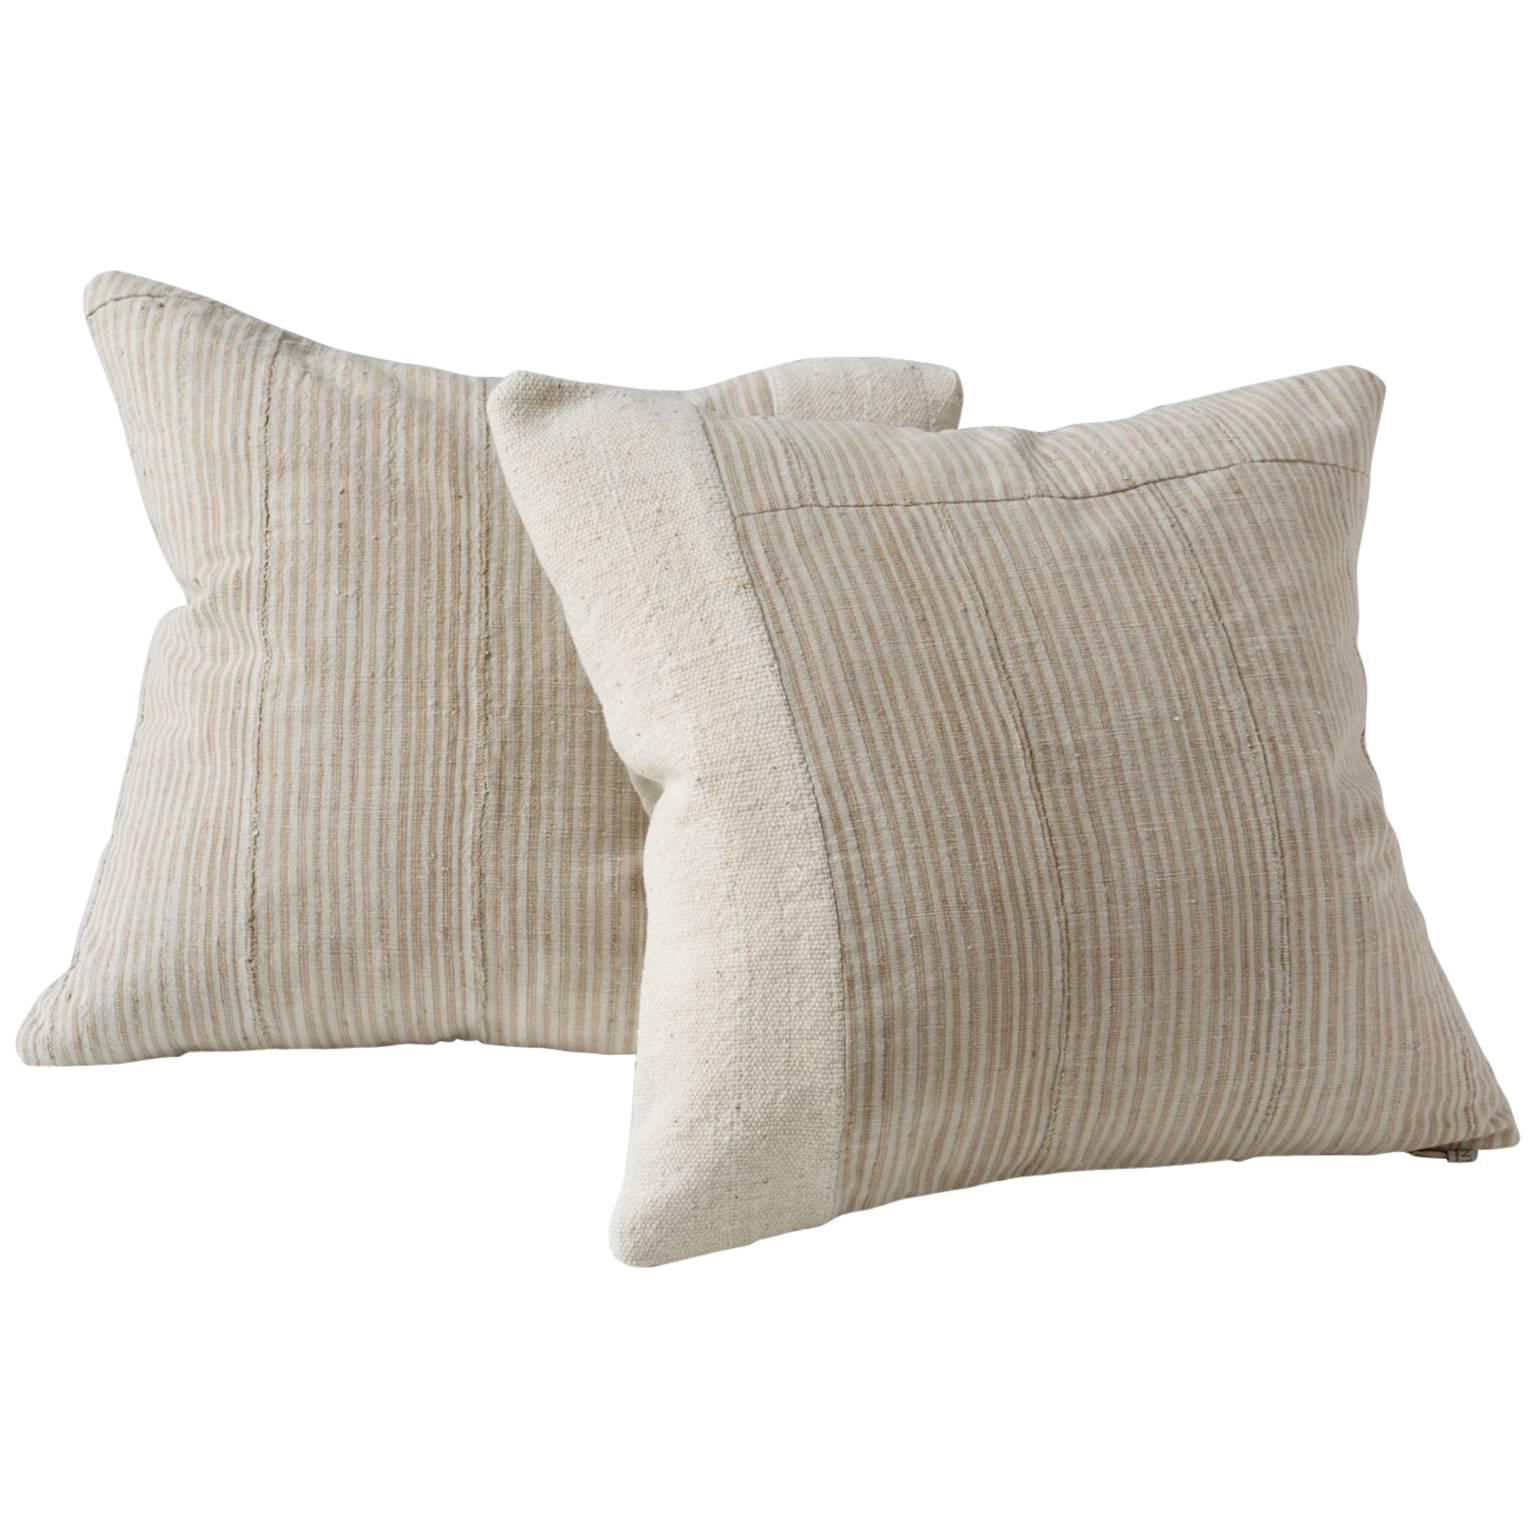 African Textile Pillow in Ecru and Cream